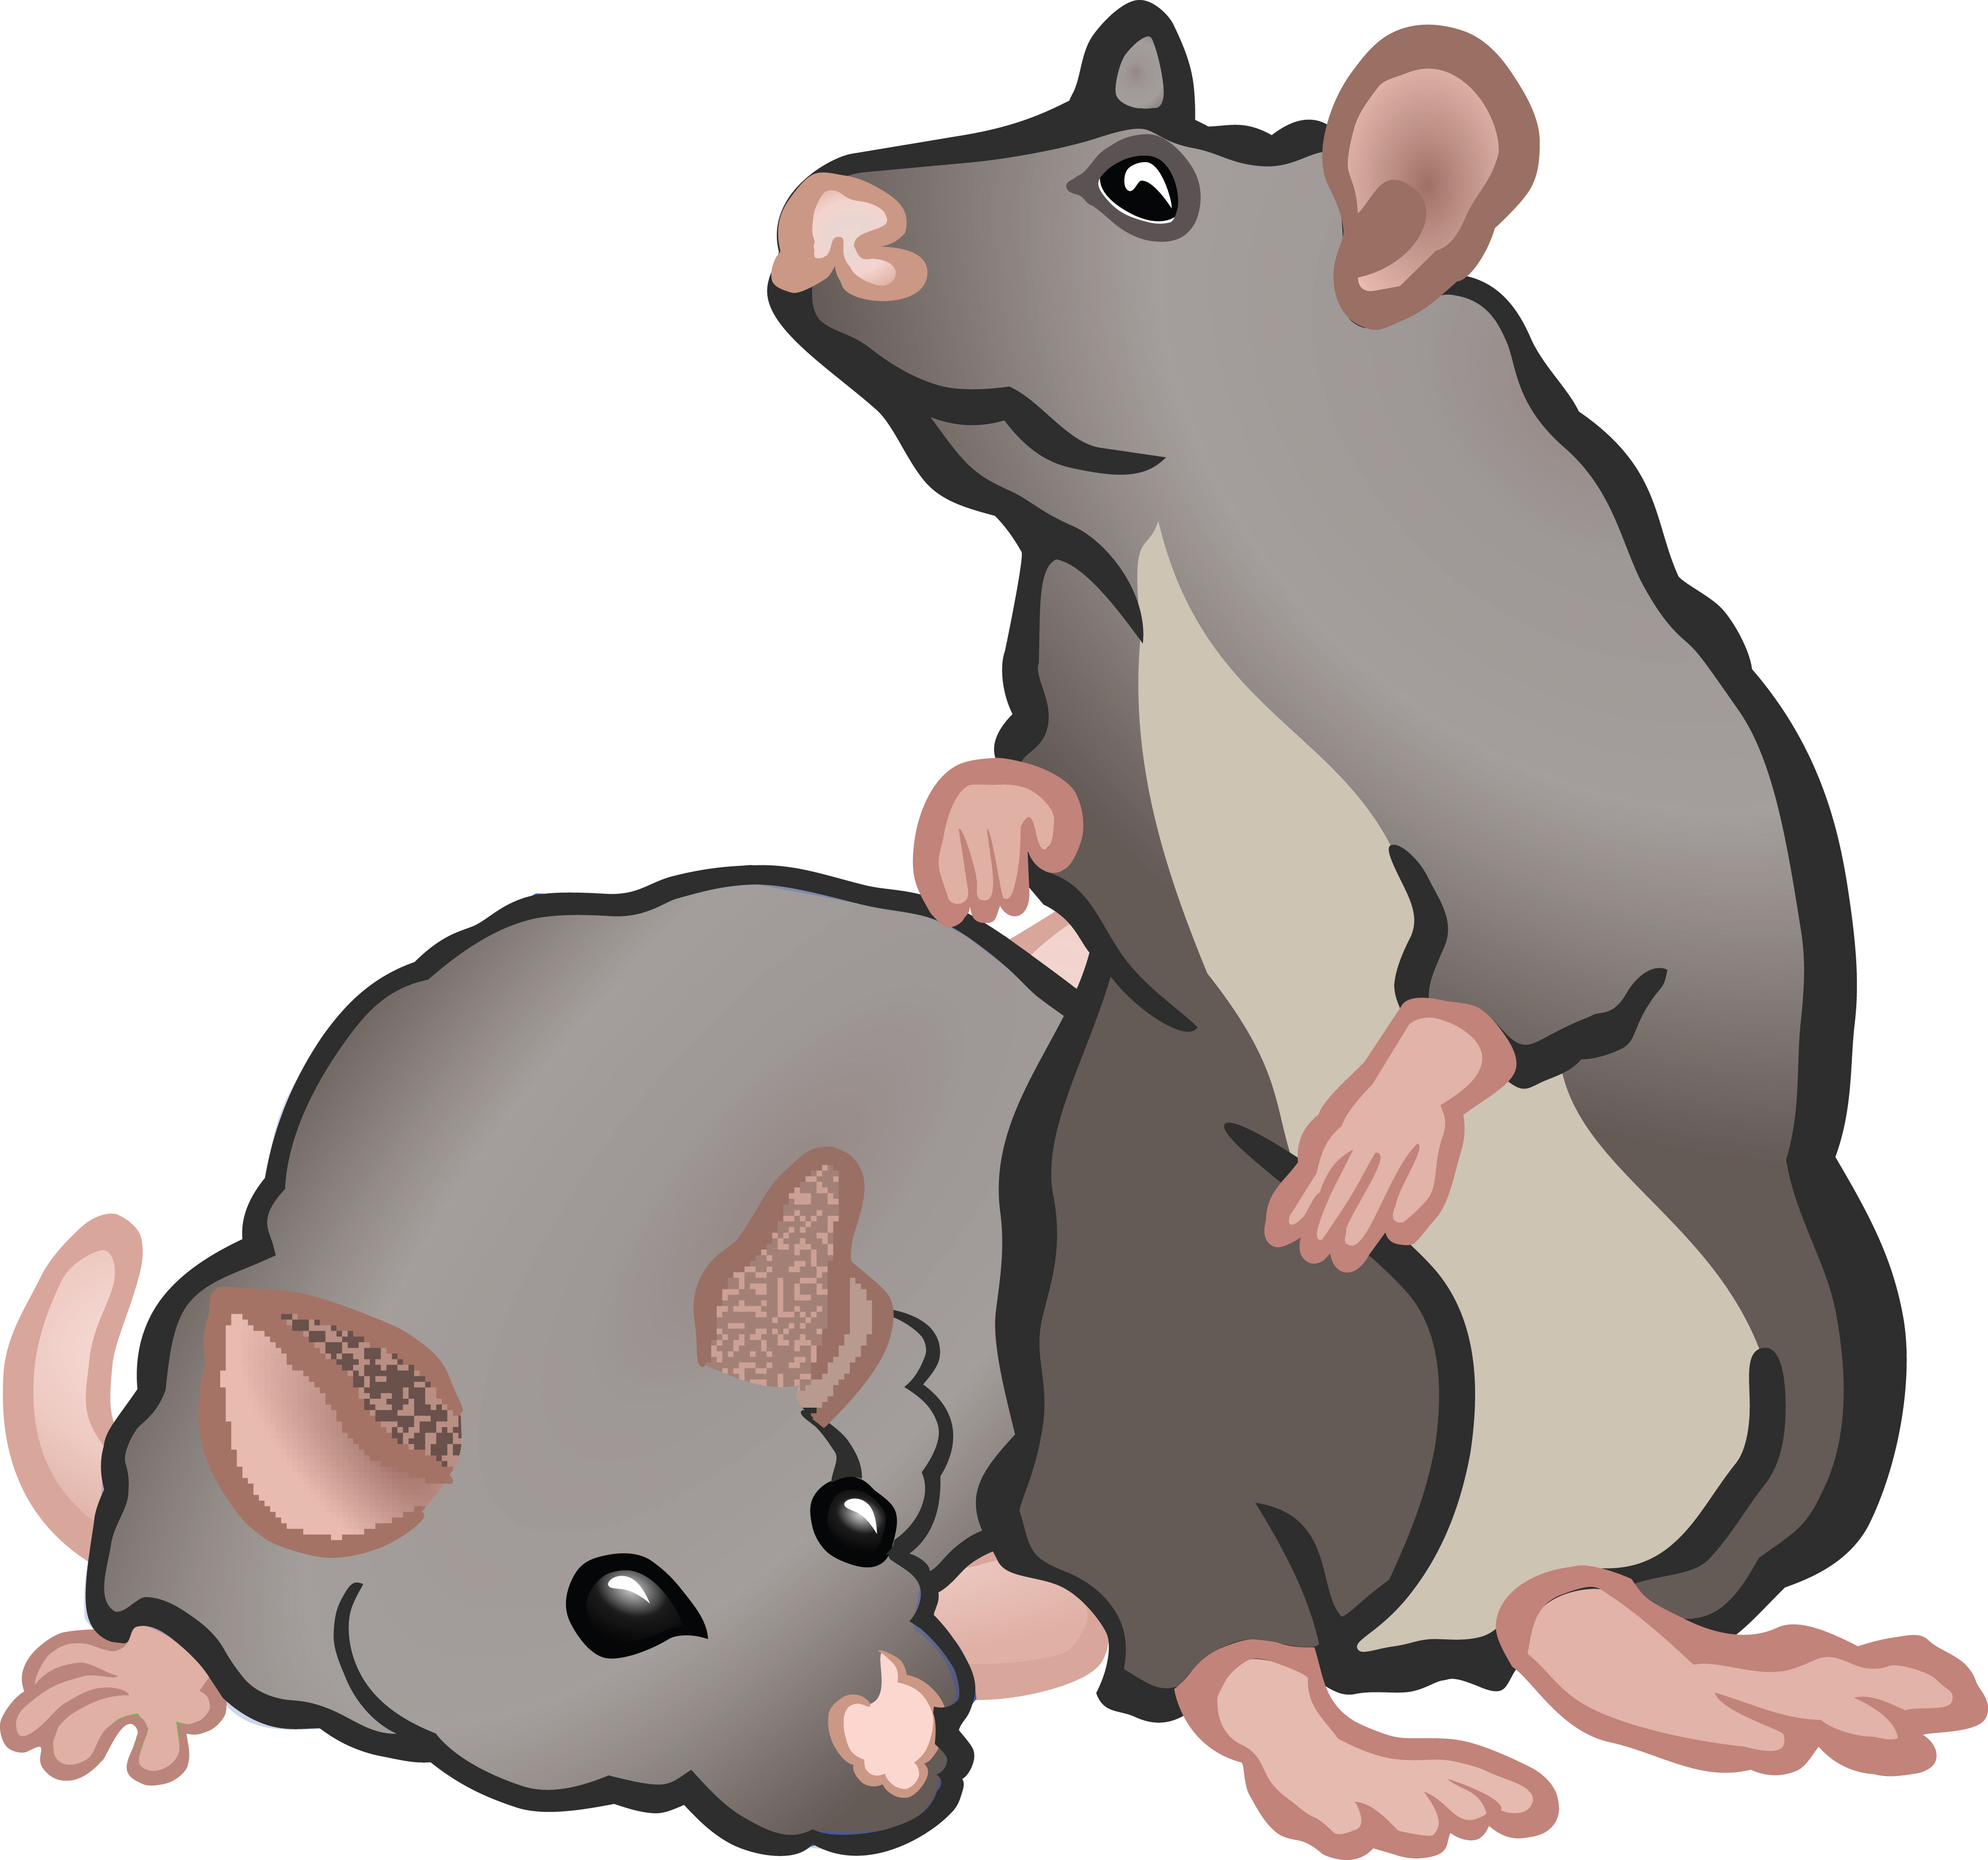 Free Clipart Of rats or mice.